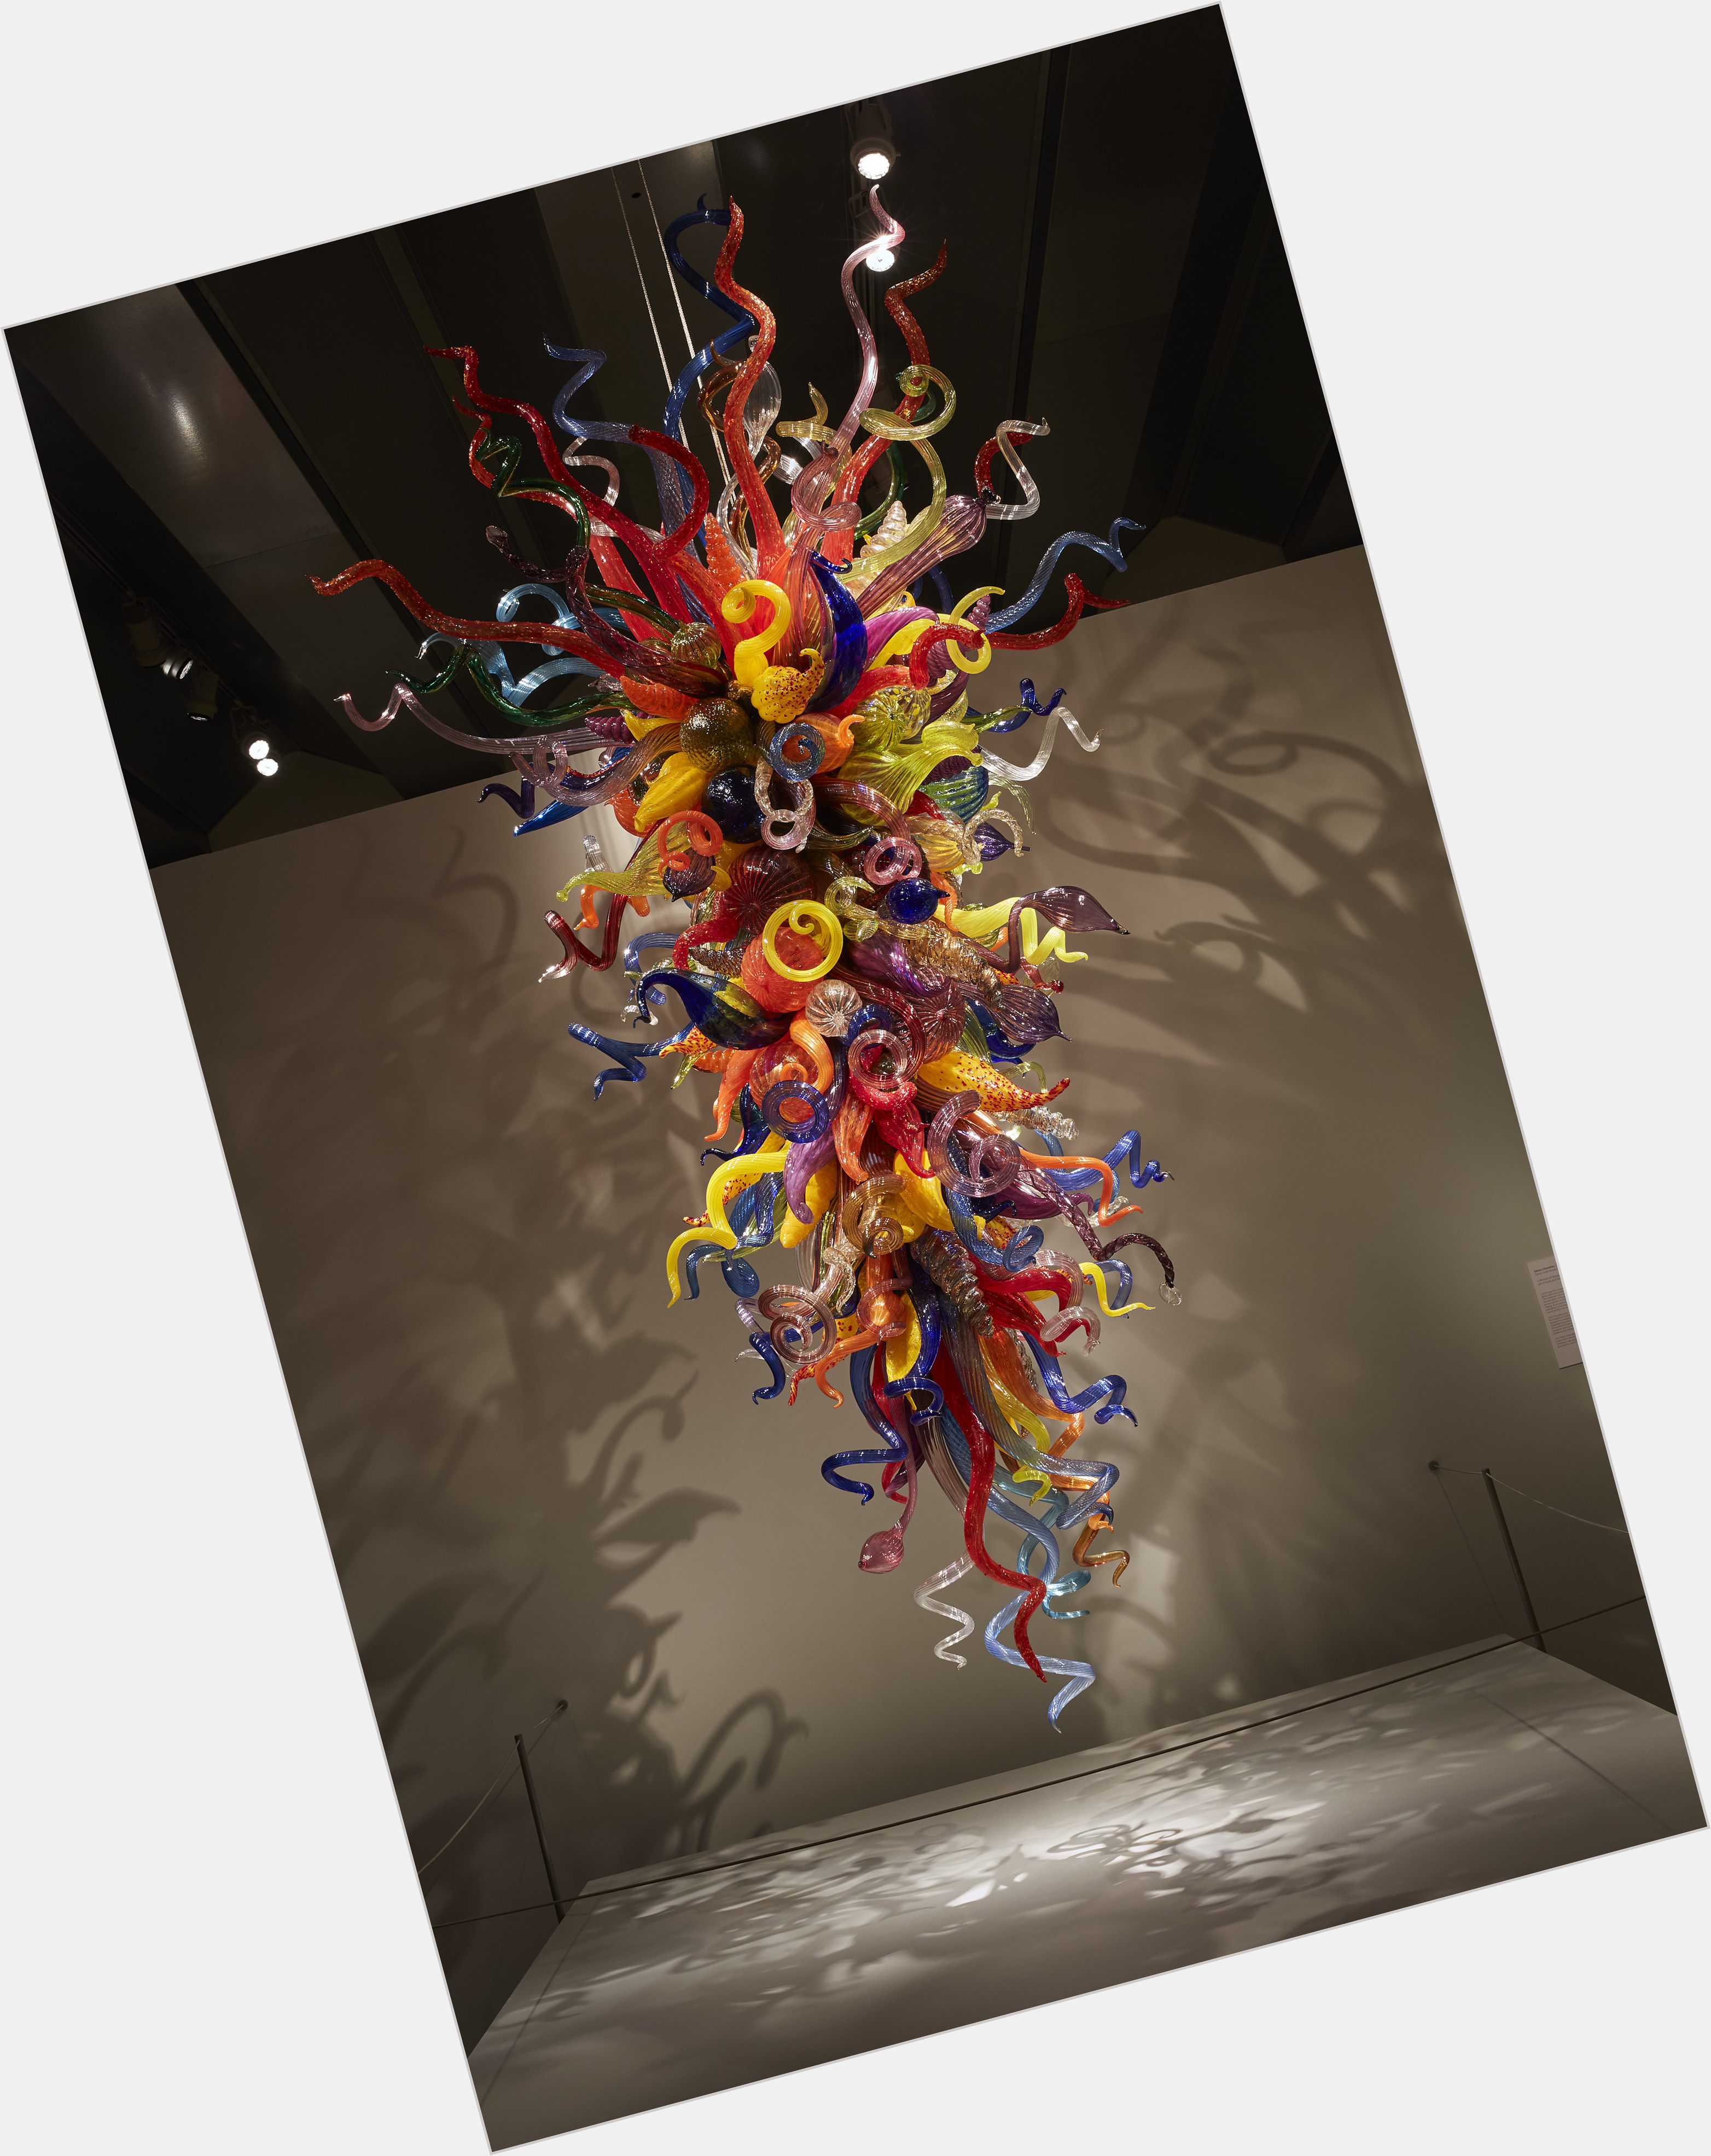 Http://fanpagepress.net/m/D/dale Chihuly Paintings 2